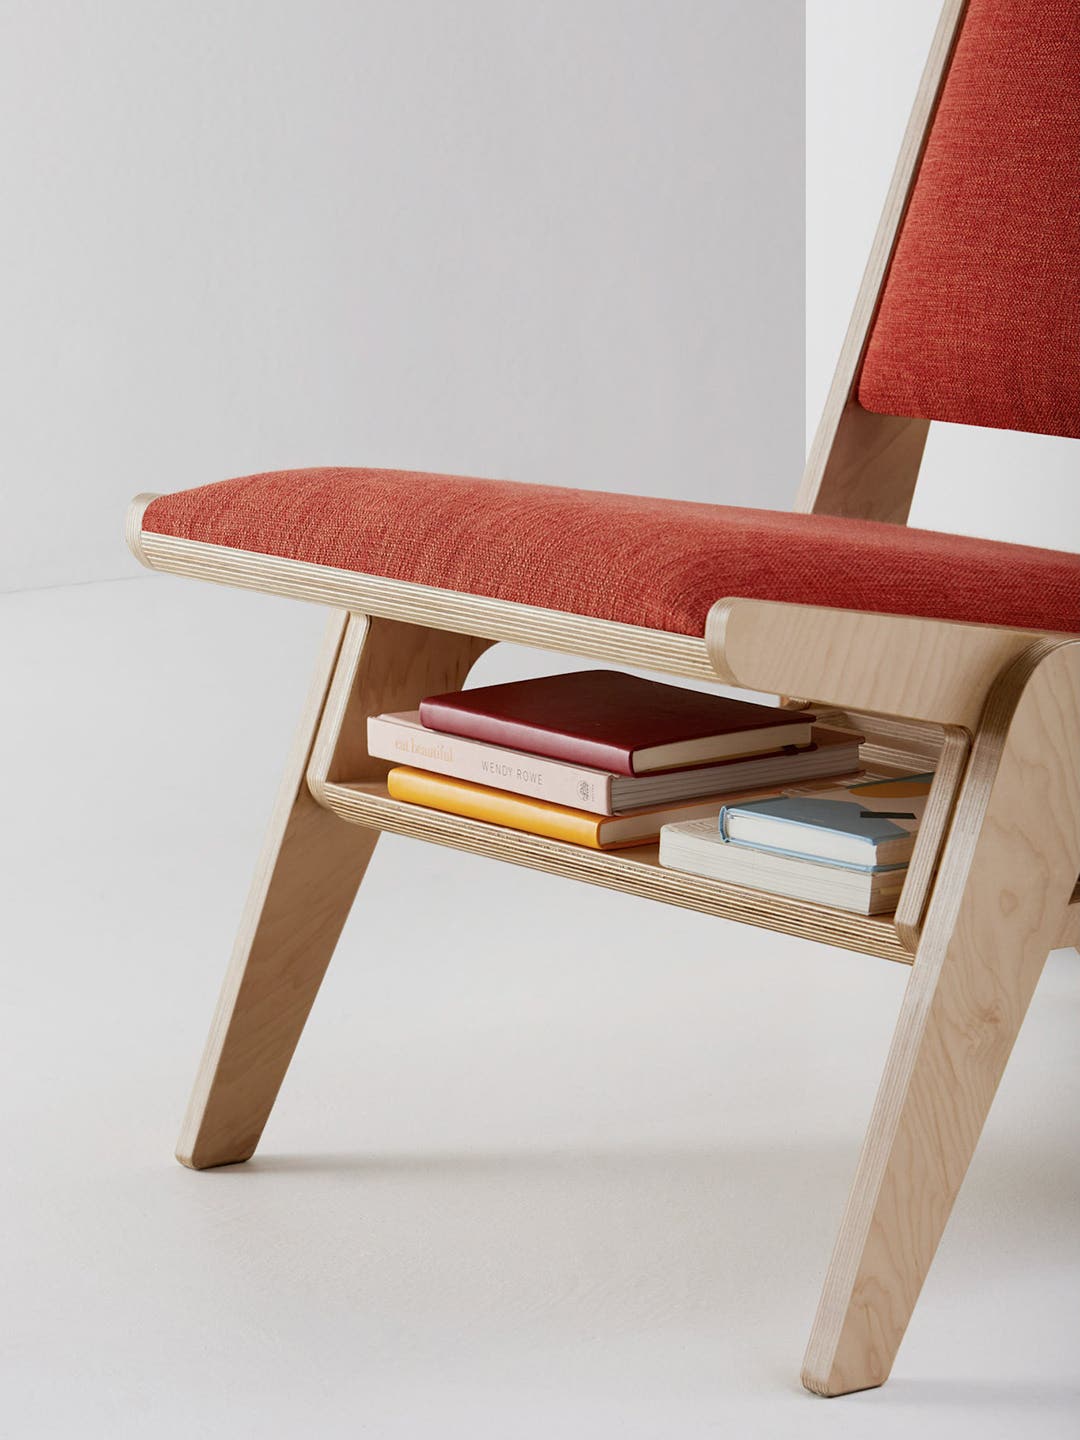 red chair with shelf for books